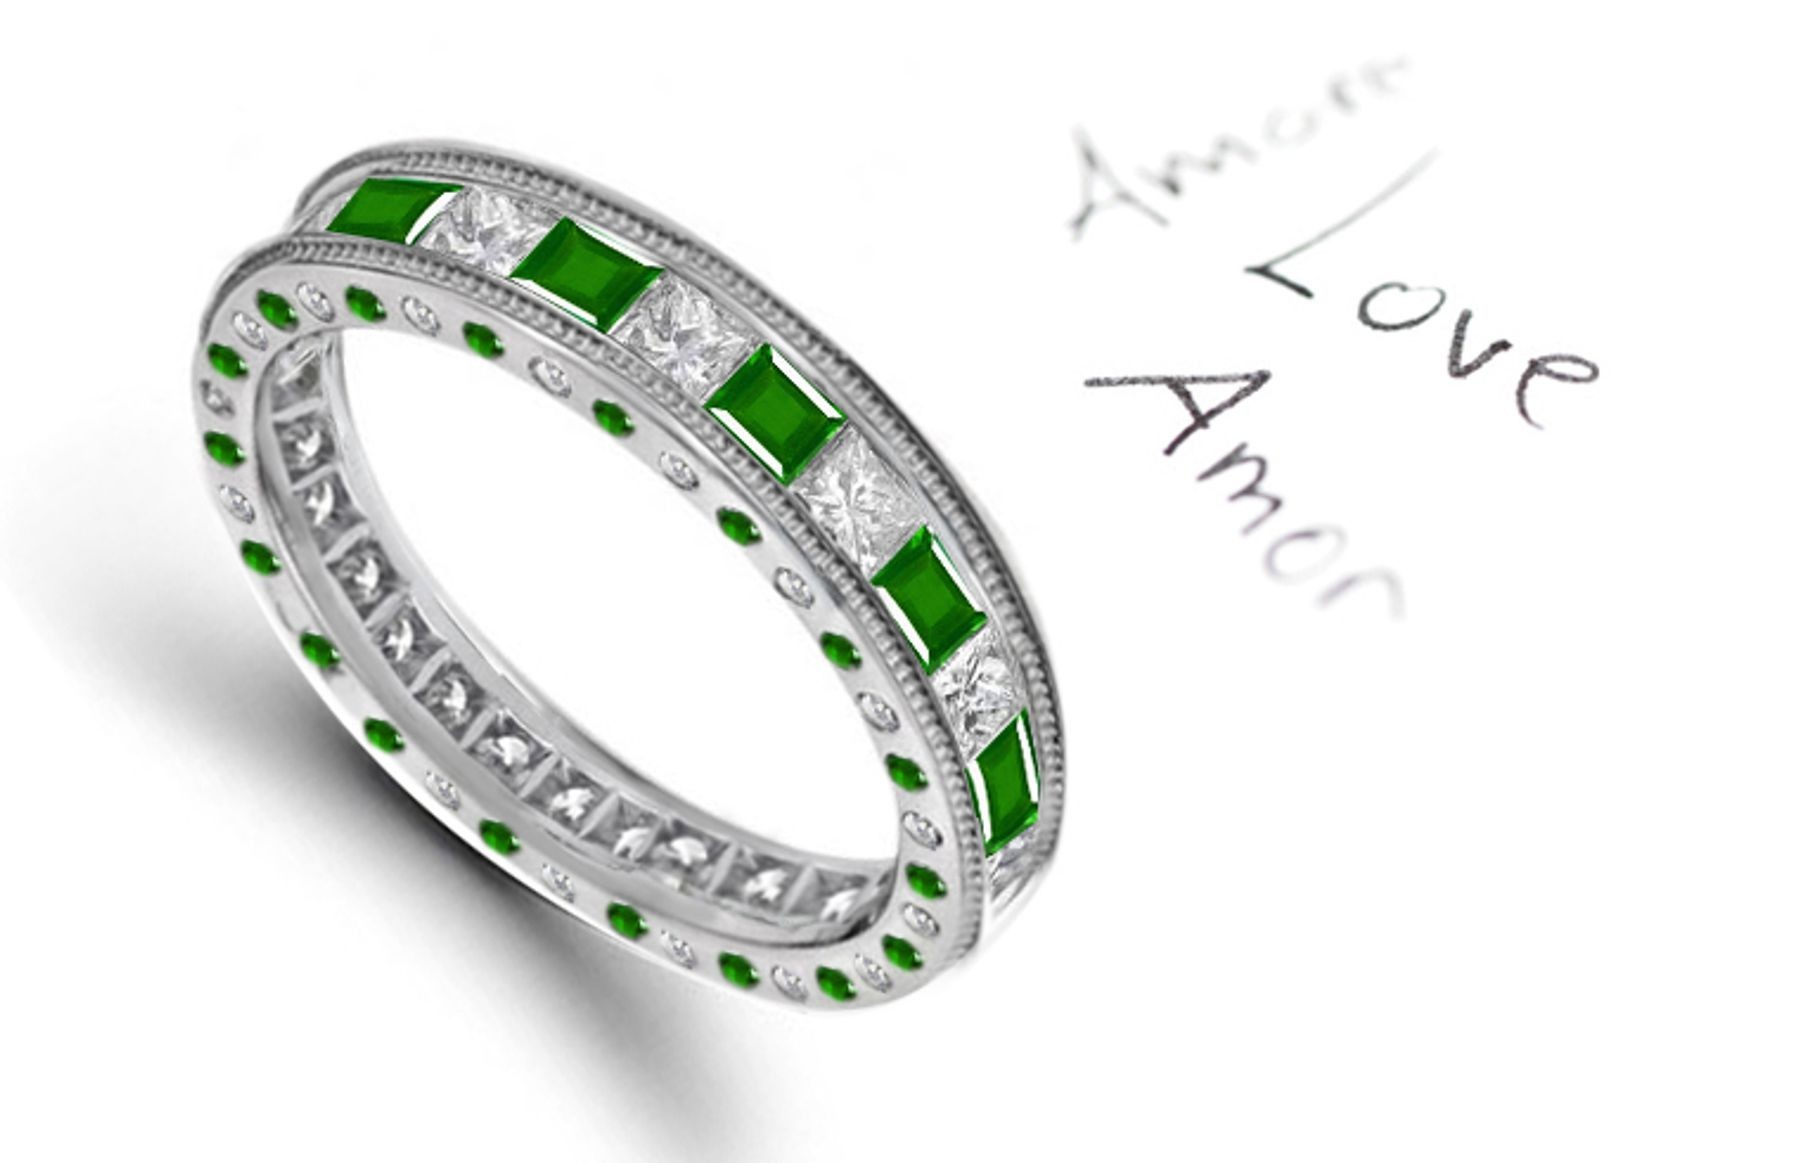 White & Green Stones: A Gold & Square Emerald & Princess Cut Diamond Ring in Size 3 to 8 for The Lady of Your Love